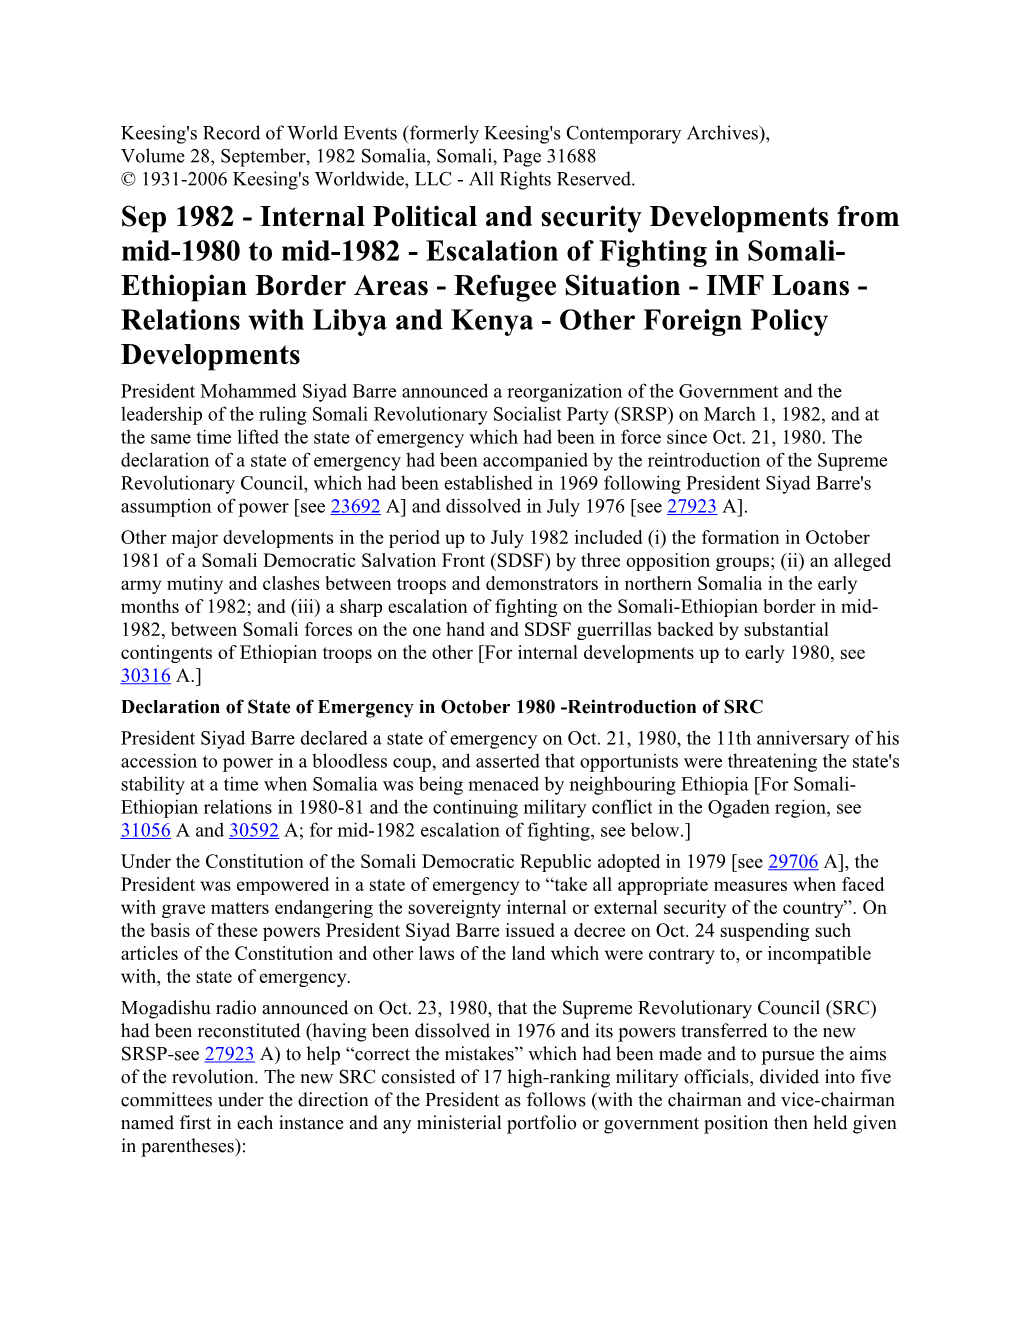 Sep 1982 - Internal Political and Security Developments from Mid-1980 to Mid-1982 - Escalation